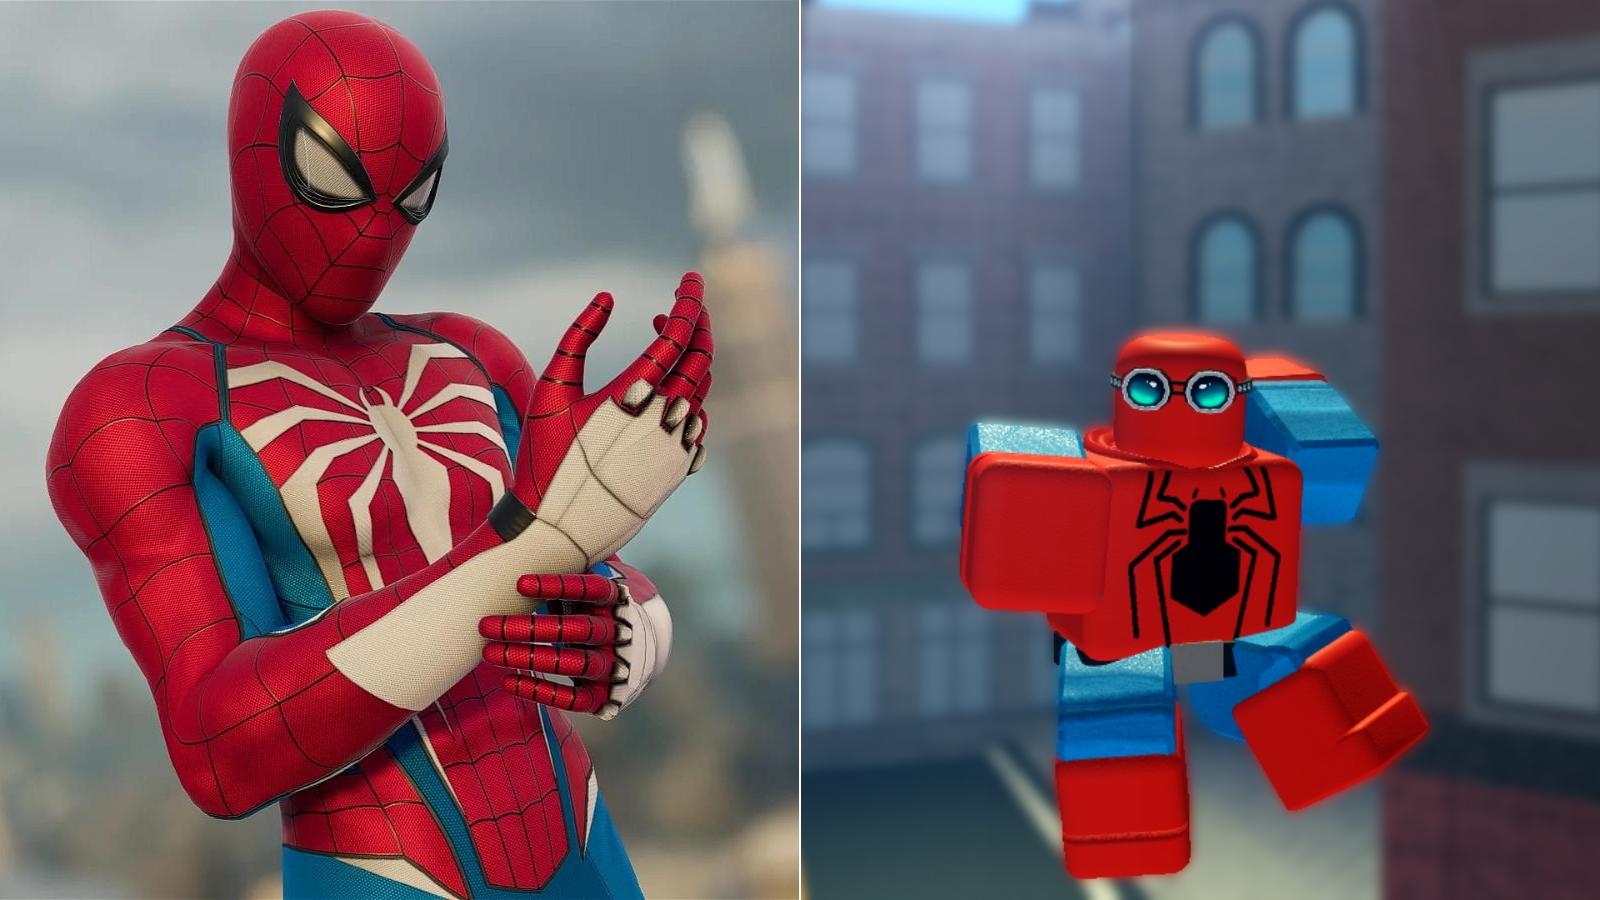 Spider-Man PS5 and Roblox version